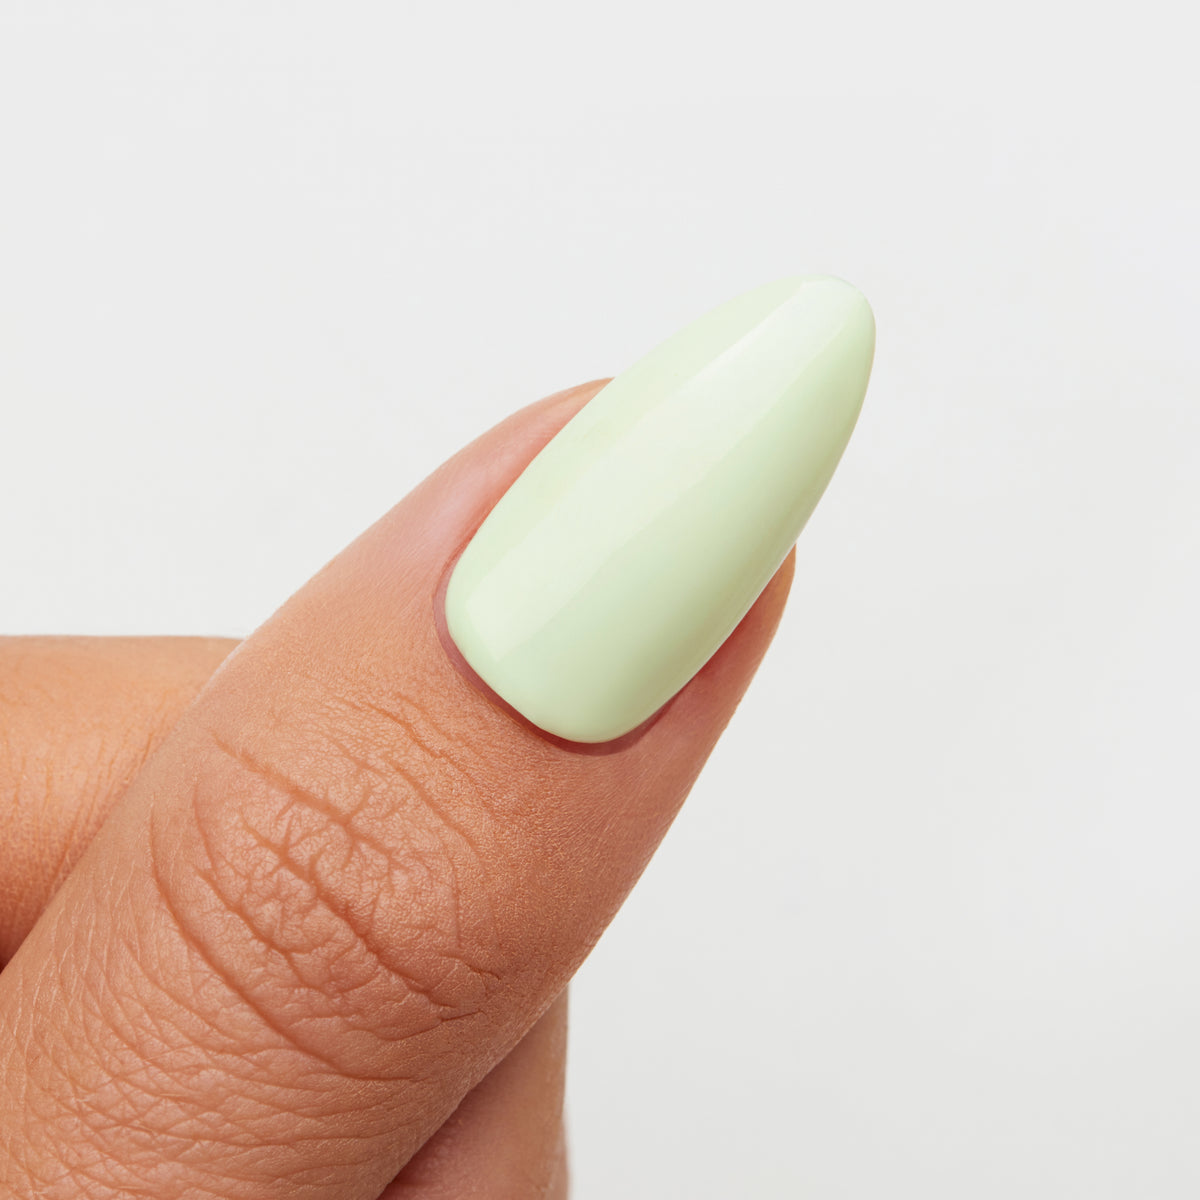 Gelous Lime Sorbet gel nail polish swatch - photographed in New Zealand